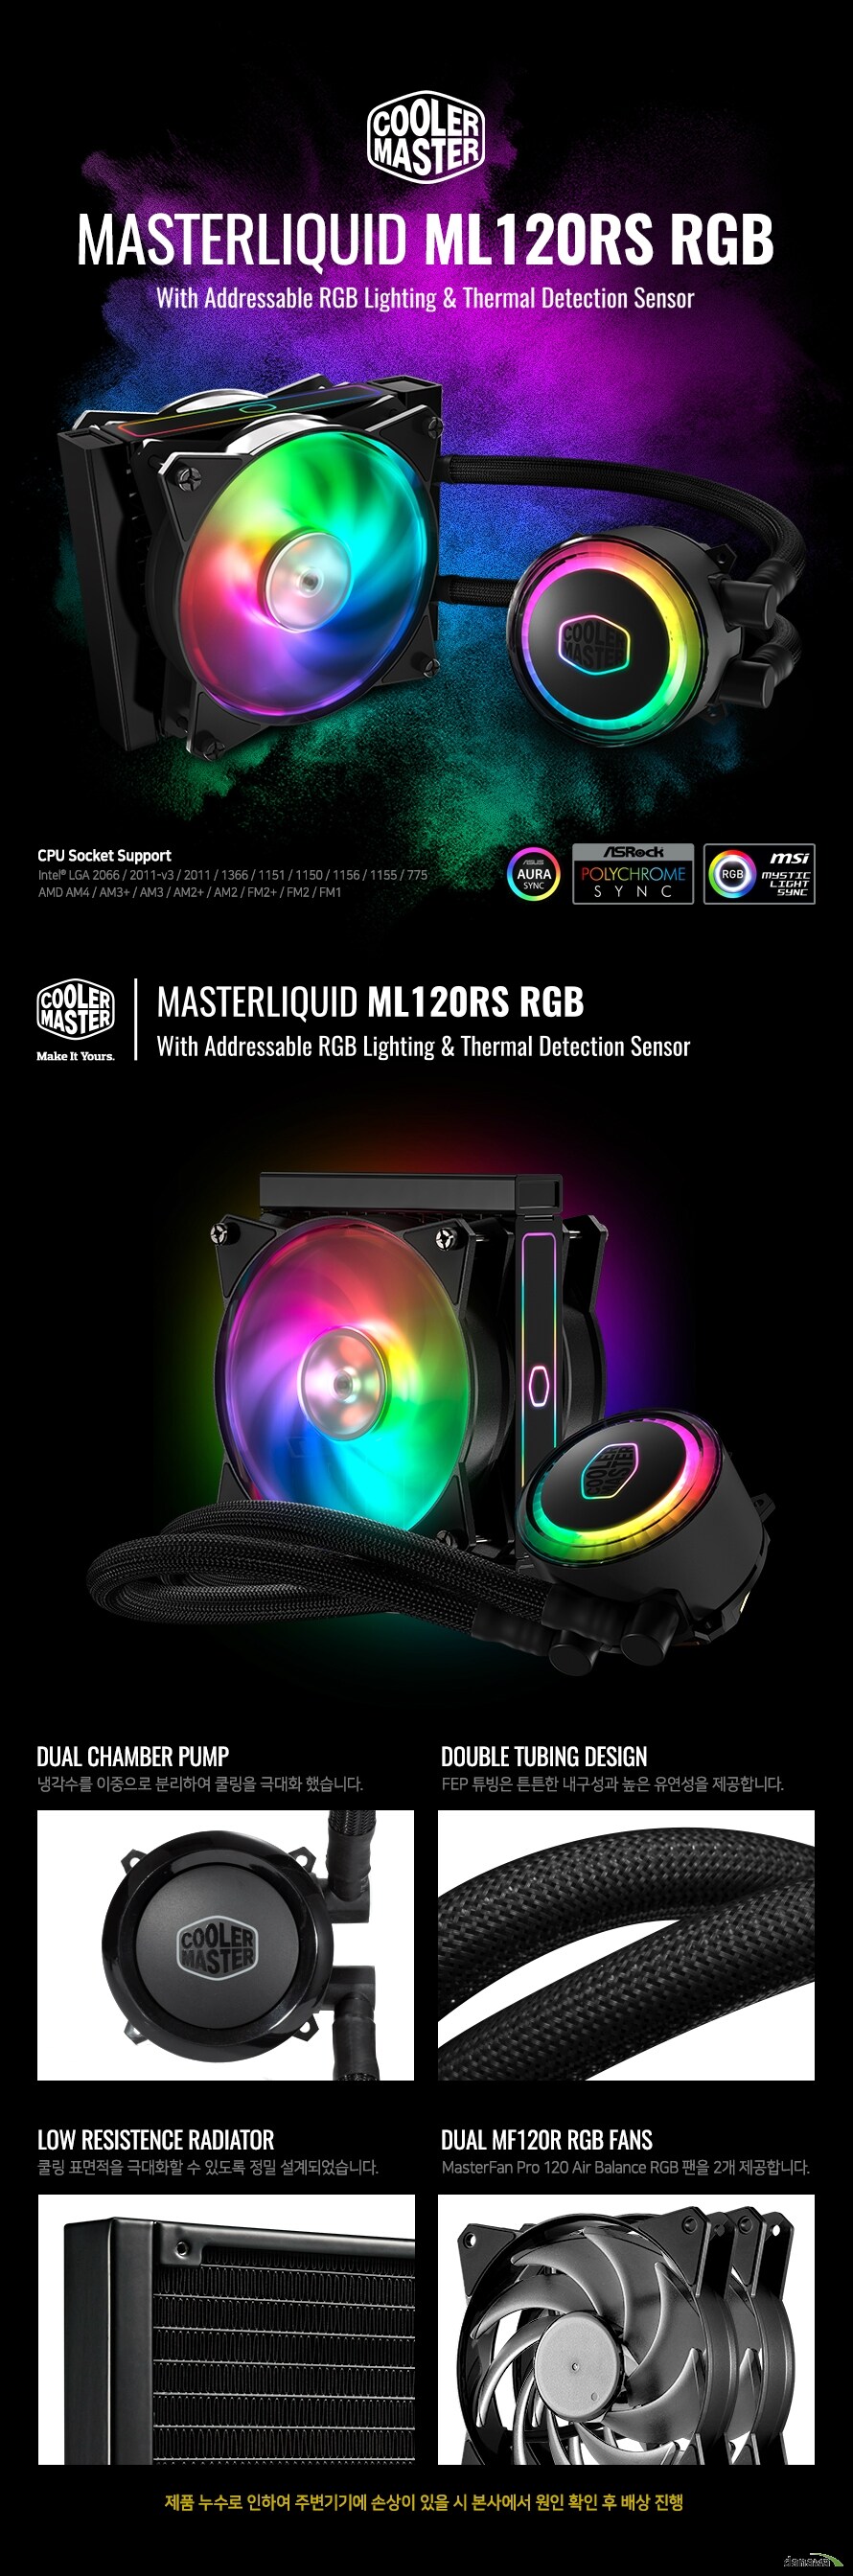 THE MOST COLORFUL WAY TO COOL MASTERLIQUID ML120R RGB  CPU Socket Support Intel LGA socket 2066 / 2011-v3 / 2011 / 1366 / 1151 / 1150 / 1156 / 1155 / 775 AMD Socket AM4 / AM3+ / AM3 / AM2+ / AM2 / FM2+ / FM2 / FM1  MASTERLIQUID ML120R RGB Addressable RGB Lighting with Controller  DUAL CHAMBER PUMP ð  иϿ  شȭ ߽ϴ.  DOUBLE TUBING DESIGN FEP Ʃ ưư    մϴ.  LOW RESISTENCE RADIATOR  ǥ شȭ  ֵ  Ǿϴ.  DUAL MF120R RGB FANS MasterFan Pro 120 Air Balance RGB  2 մϴ.  ǰ  Ͽ ֺ⿡ ջ   翡  Ȯ      ο   è 𷯸 MasterLiquid ML120R  ȭ  νĿ  ʽϴ. PPS (Polyphenylene sulfide)     ȭ  ϸ  ̳ ߿   ʾ  پϴ.  DIFFUSER ݻ籤       TRI-PHASE MOTOR WITH SILENT DRIVER  dBA ϸ鼭 ۵  ּȭ  O-RING MADE OF HIGH QUALITY EPDM RUBBER   ǰ EPDM   MICROCHANNEL COLD PLATE   ũ ä  ǥ ִȭϿ     HIGH PERFORMANCE IMPELLER       RGB LED   ý   RGB ȭ  ־ ϰִ LED  մϴ. ⺻ Ǵ RGB Ʈѷ ƽ, Ŭ, 극  پ LED Ʈ     ְ,   ӵ    մϴ.    ̽ ϰ ۵  ̽ ˸ CPU ߿ żϰ մϴ.  RGB  ȭ   RGB Ʈѷ  Բ   ϰ ȭ   ֽϴ.   ġ ȣȯ  Ǵ  κ Ͽ  ġ մϴ. پ Ǽ  ս  ý ϼ.    120mm      ͷν   , پ  ȯ ȿ , ϰ ϰ ۵     ǳε  ǥ   ֽϴ. Ź ð  ̰  ý ϼ.        , ȯ ȿ ϰϸ  Ź ð  մϴ.   ġ  Intel AMD ÷     ġ   ġ     ʿϴ.  MASTERFAN PRO Balance    𷯸 ̾ 𷯸 Ͽ     RGB LED  ϴ. پ   ־   ּȭϿ     Ÿ̳  ļ   ߻ ʽϴ. ,     ּȭϿϴ.  16.7M Color 1670  RGB ÷ LED ý۰ ȭϿ ִ Ŀ Ʃ   ֽϴ.   پ    ǳ ǳ   𷯸 ̾     ϴ.  RGB LED Ʈѷ   ư ۸ε LED ÷  带   ֽϴ.  1 to 3 ø ̺  ϳ ̺ 3 ҿ   ִ ø ̺ ⺻ մϴ.  Product NameMasterLiquid ML120R RGB ModelMLX-D12M-A20PC-R1 CPU SocketIntel LGA 2066 / 2011-v3 / 2011 / 1151 / 1150 / 1155 / 1156 / 1366 / 775 socket AMD AM4 / AM3+ / AM3 / AM2+ / AM2 / FM2+ / FM2 / FM1 socket Radiator MaterialAluminum Radiator Dimensions157 x 119.6 x 27mm Fan Dimensions120 x 120 x 25 mm Fan Quantity2 PCS Fan Speed650 ~ 2000 RPM (PWM)  10% Fan Air Flow66.7 CFM (Max) Fan Air Pressure2.34 mmH2O (Max) Fan MTTF160,000 hours Fan Noise Level6 ~ 30 dBA Fan Connector4-Pin (PWM) Fan Rated Voltage12 VDC Pump Dimensions83.6 x 71.8 x 52.7 mm Pump MTTF70,000 hours Pump Noise Level< 15 dBA Pump Connector3-Pin Pump Rated Voltage12 VDC Warranty2 Years  CoolerMaster GLOBAL NO.1 𷯸 𷯸 A/S ó  ȳ  1. ǰ  A/S û  ǰ ڵ ȣ Ǵ ų ʼ 2. A/S Ⱓ  ҷ  ǰ شϴ ǰ  1:1 ȯ  3. ǰ   Ƿ    ļ õ  ǰ ջ  A/S  å ʽϴ. 4. ǰ ⺻   A/S Ұ ϸ   ǰ A/S  5. 𷯸 A/S   񽺰 Ǹ    ǰ   ֽϴ. 6. ǰ   Ʈ  Ÿ μǰ, ڻ ǰ  ǰ ս 翡 å ʽϴ. 7. A/S Ⱓ  ǰ 1:1 ȯ  ۺ(պ)  ()̽ δϴ   (ù ̿ Ÿ ù ̿  Կ ݵ˴ϴ.)  A/S û  ʽ ׸ ڵ尡   A/S  å  ʽϴ.   𷯸 ǰ  𷯸 ѹα     ()̽Դϴ. 𷯸  ǰ  Կ ()̽  񽺸   ֽϴ. 𷯸 ǰ   ڽ  ǰ ο ø ƼĿ  ȮϽñ ٶϴ. ()̽   ǰ ƴ ǰ A/S   ϴ.  ѹα  Կ DAEYANG CASE ֽȸ ̽ 